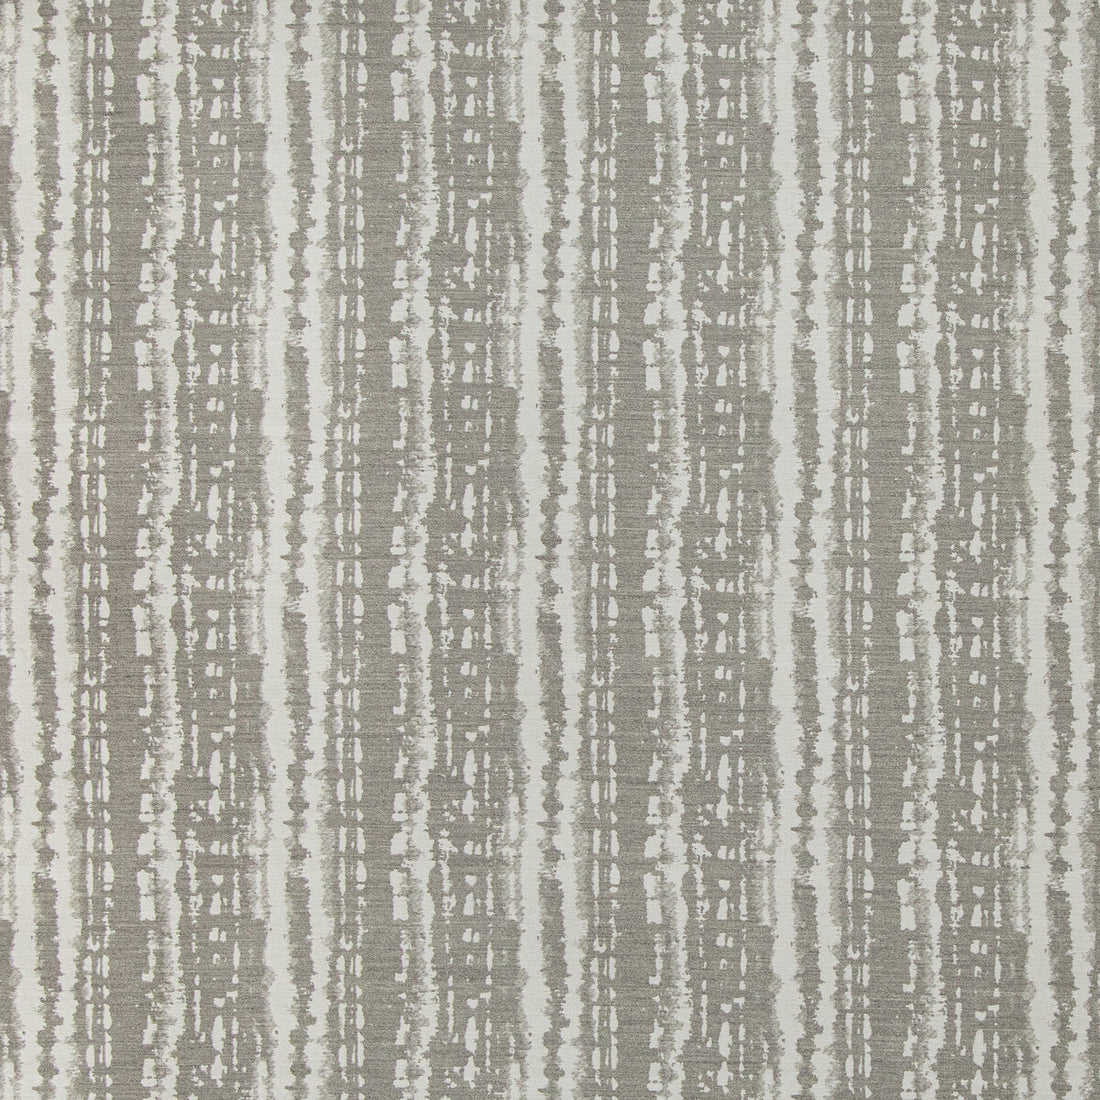 Leilani fabric in pebble color - pattern 35826.11.0 - by Kravet Design in the Indoor / Outdoor collection